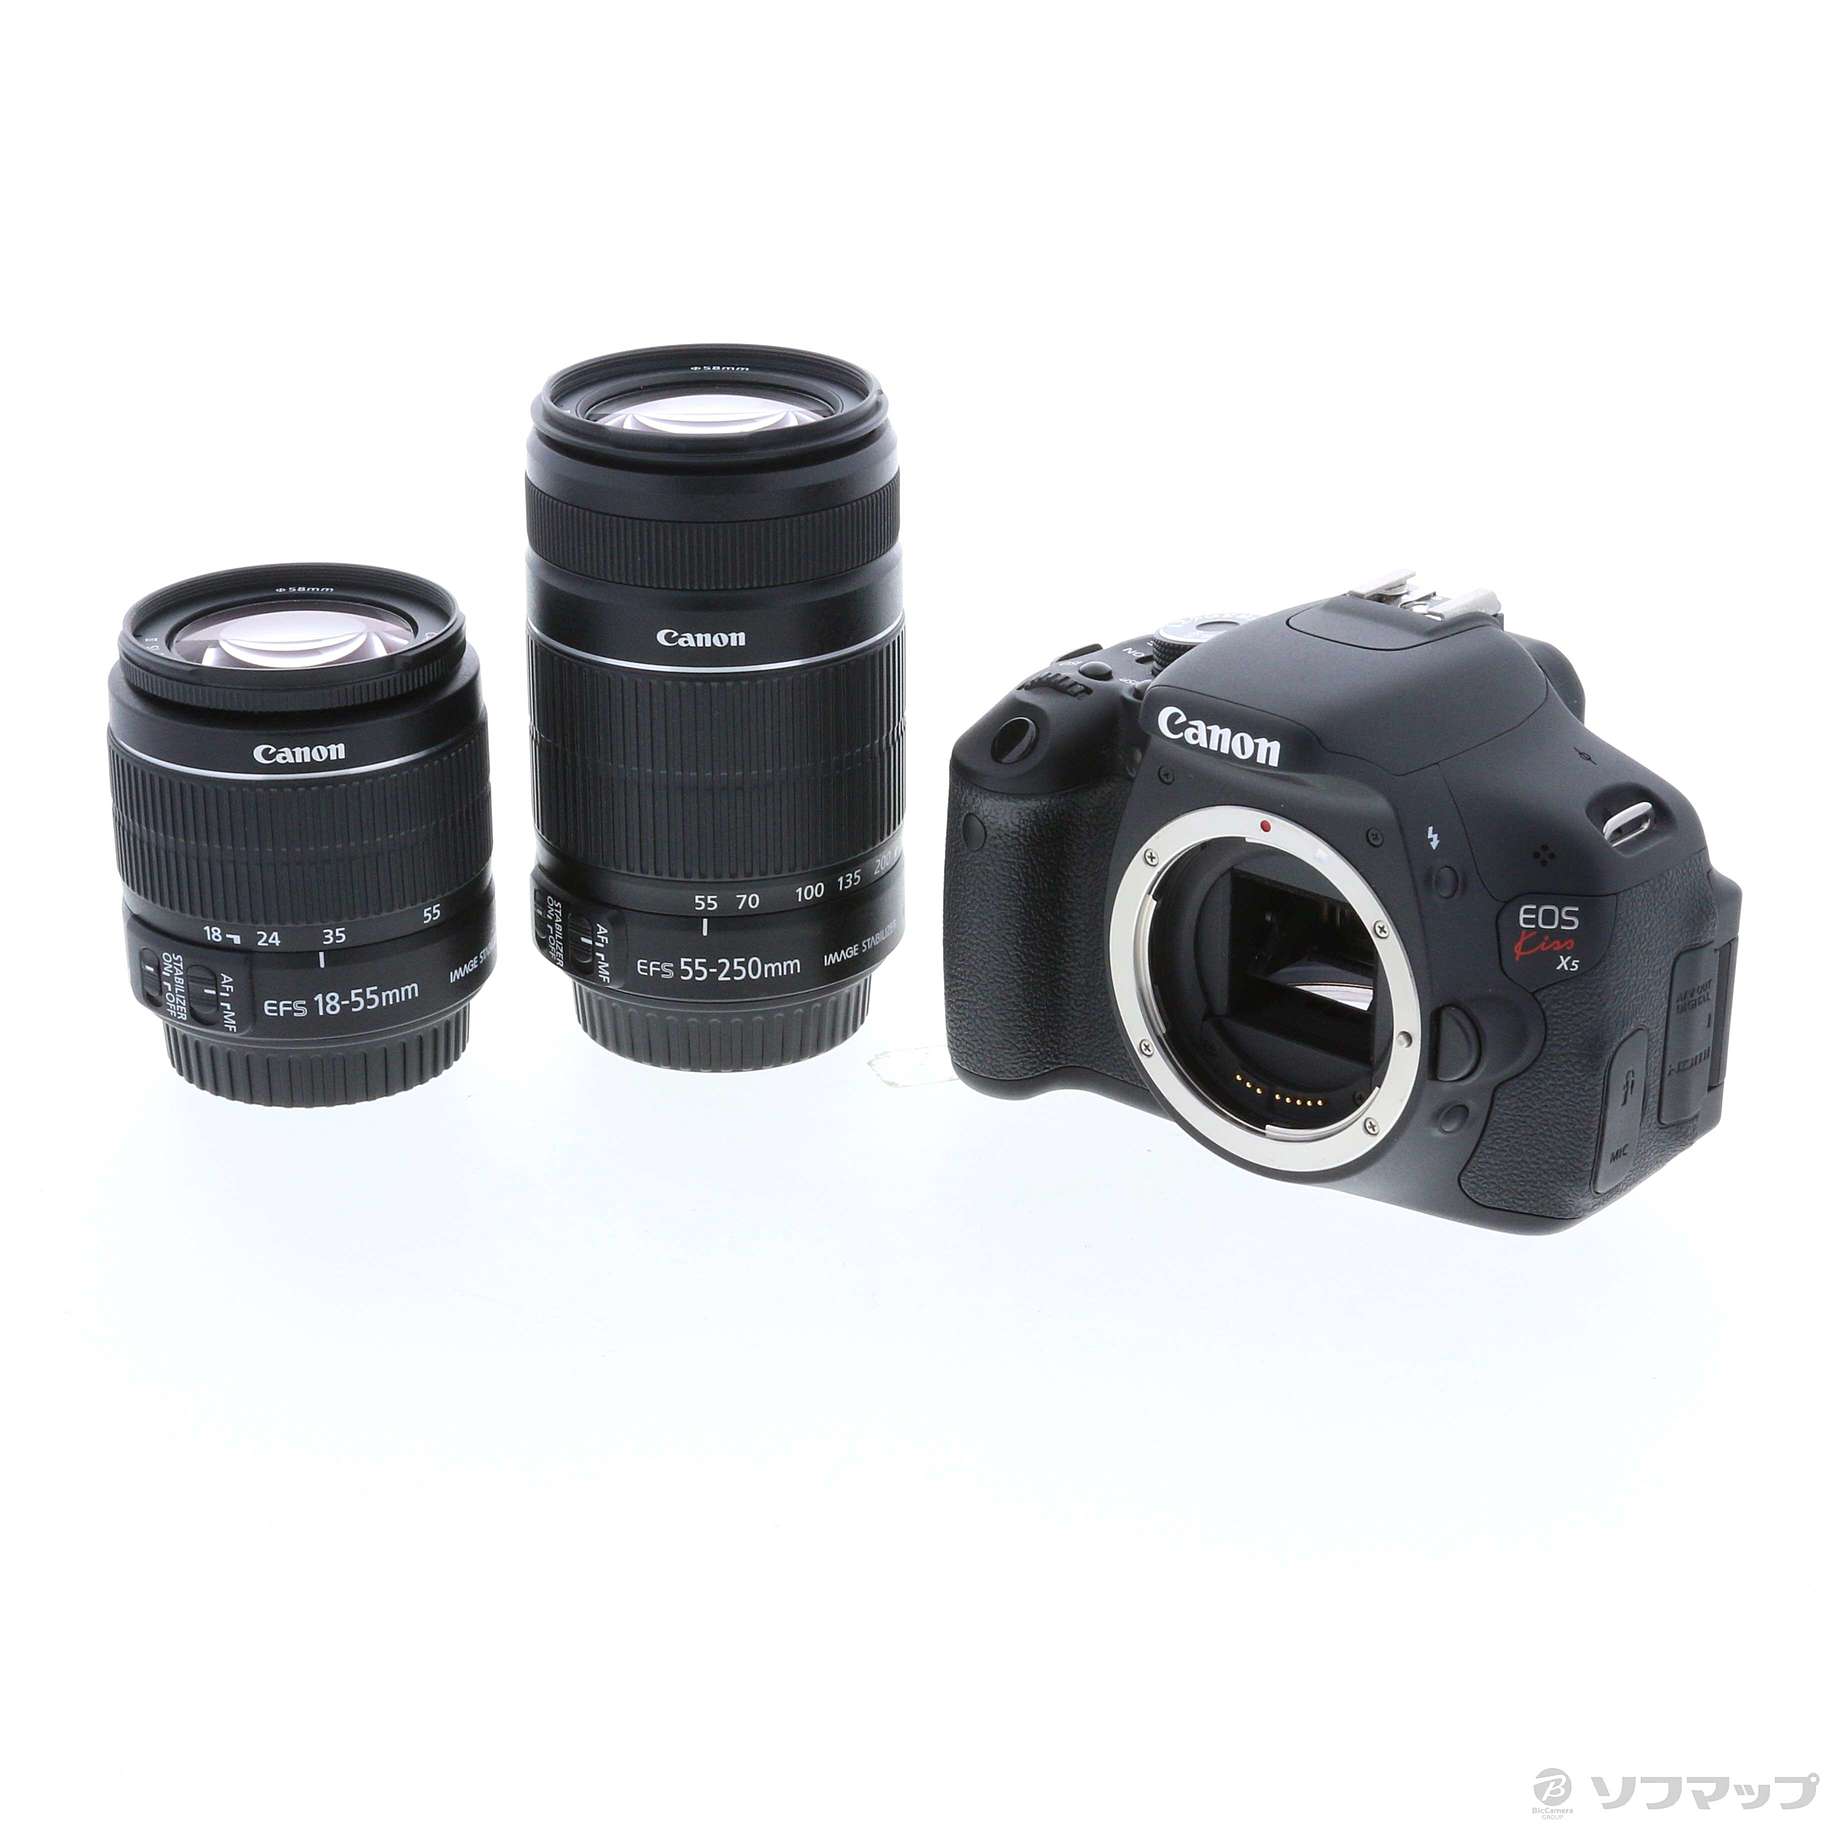 Canon EOS KISS X5 Wズームキット-